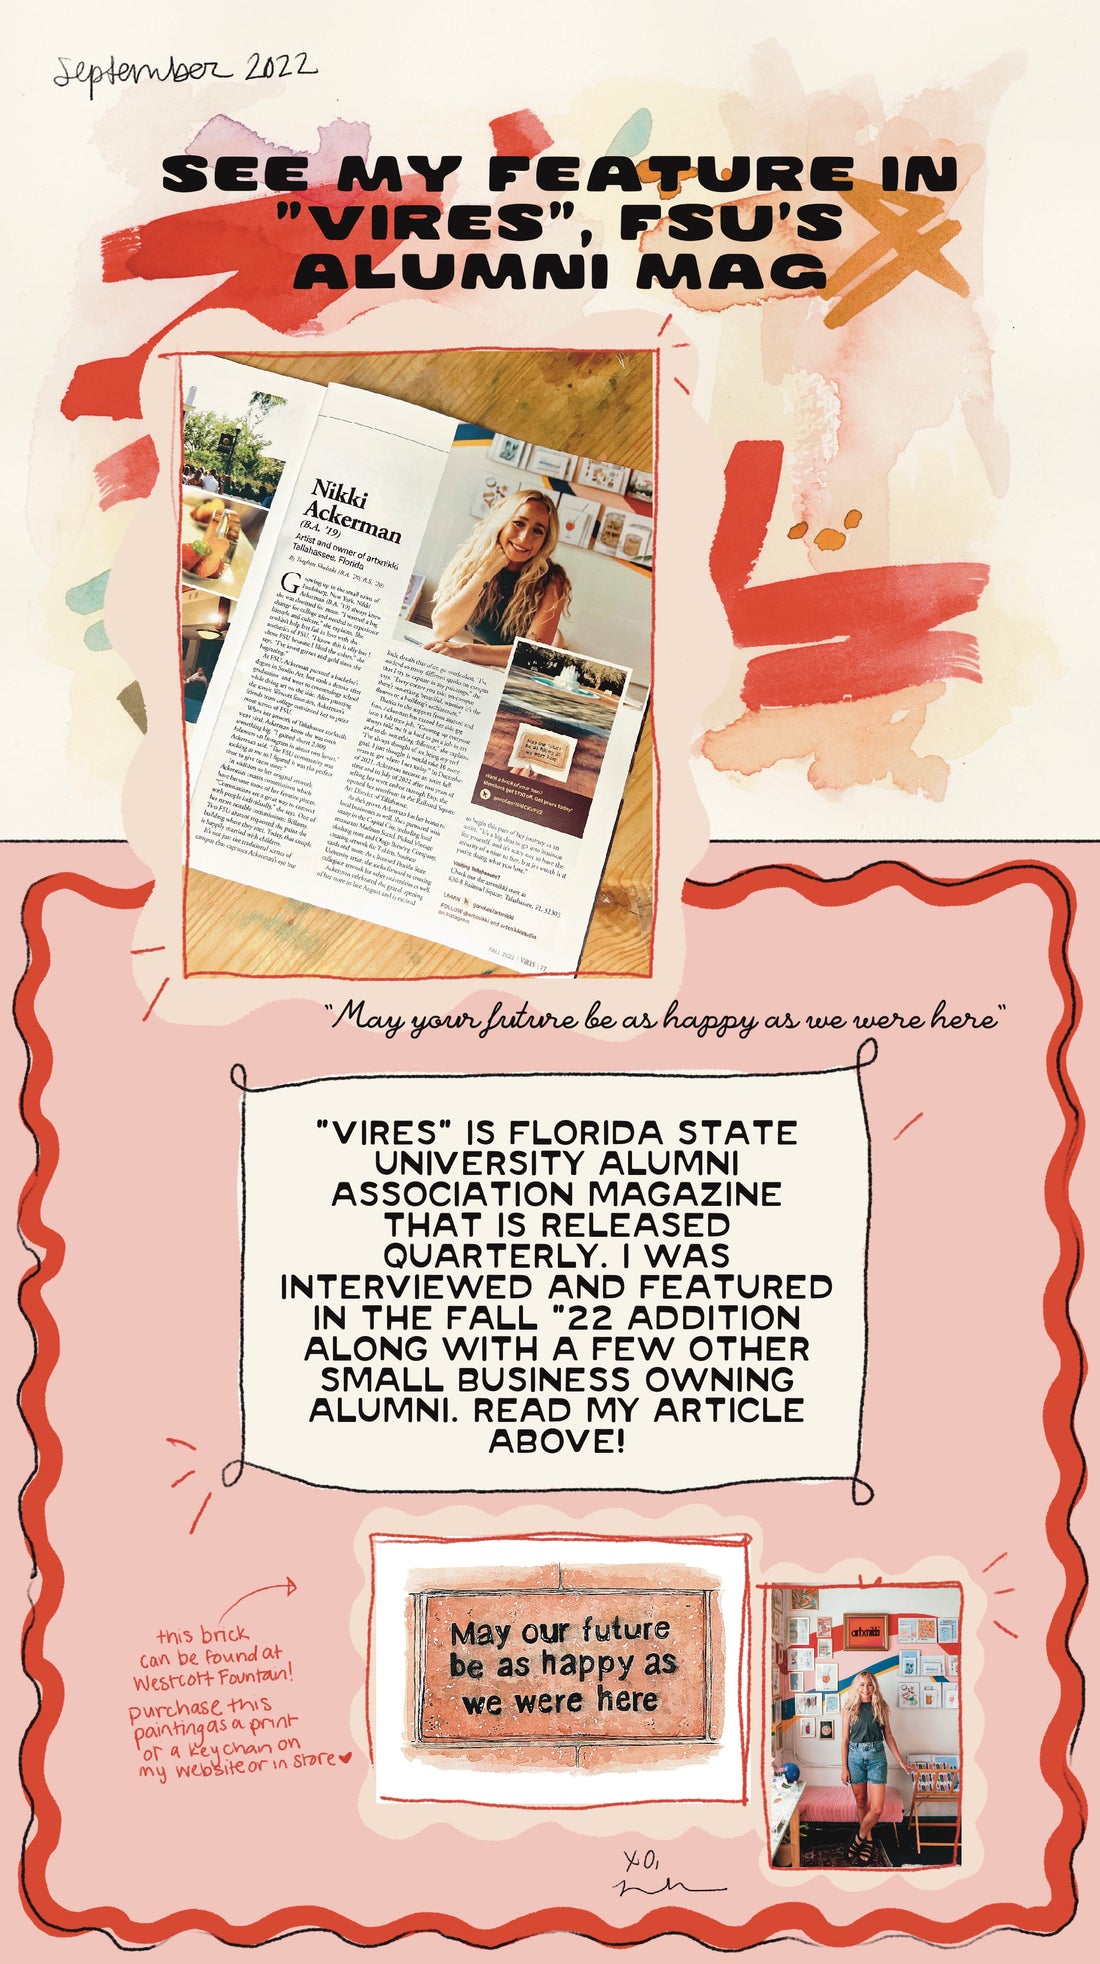 see my recent feature in "Vires", FSU's alumni mag!